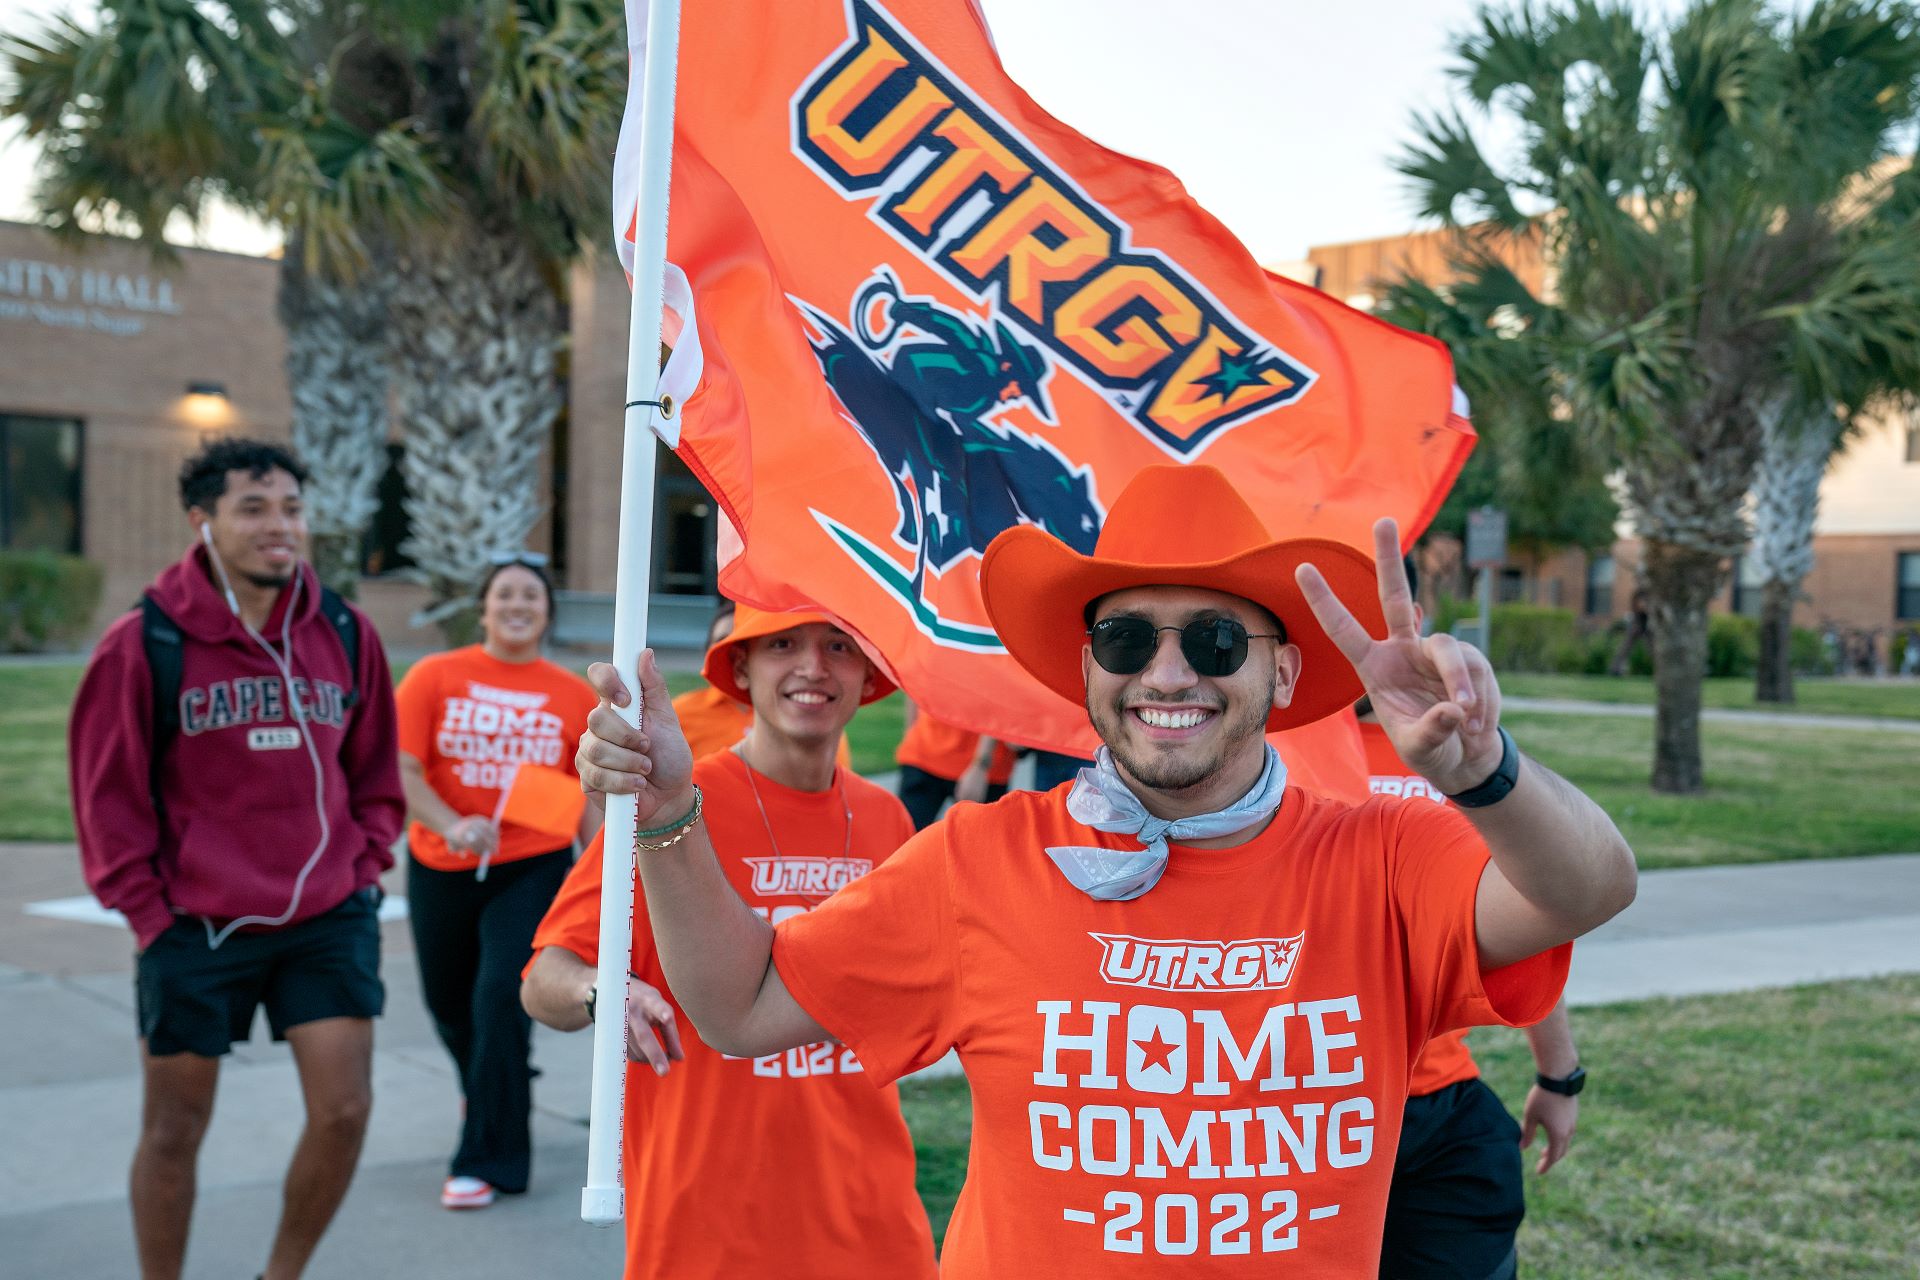 Male student representing UTRGV and holding school flag